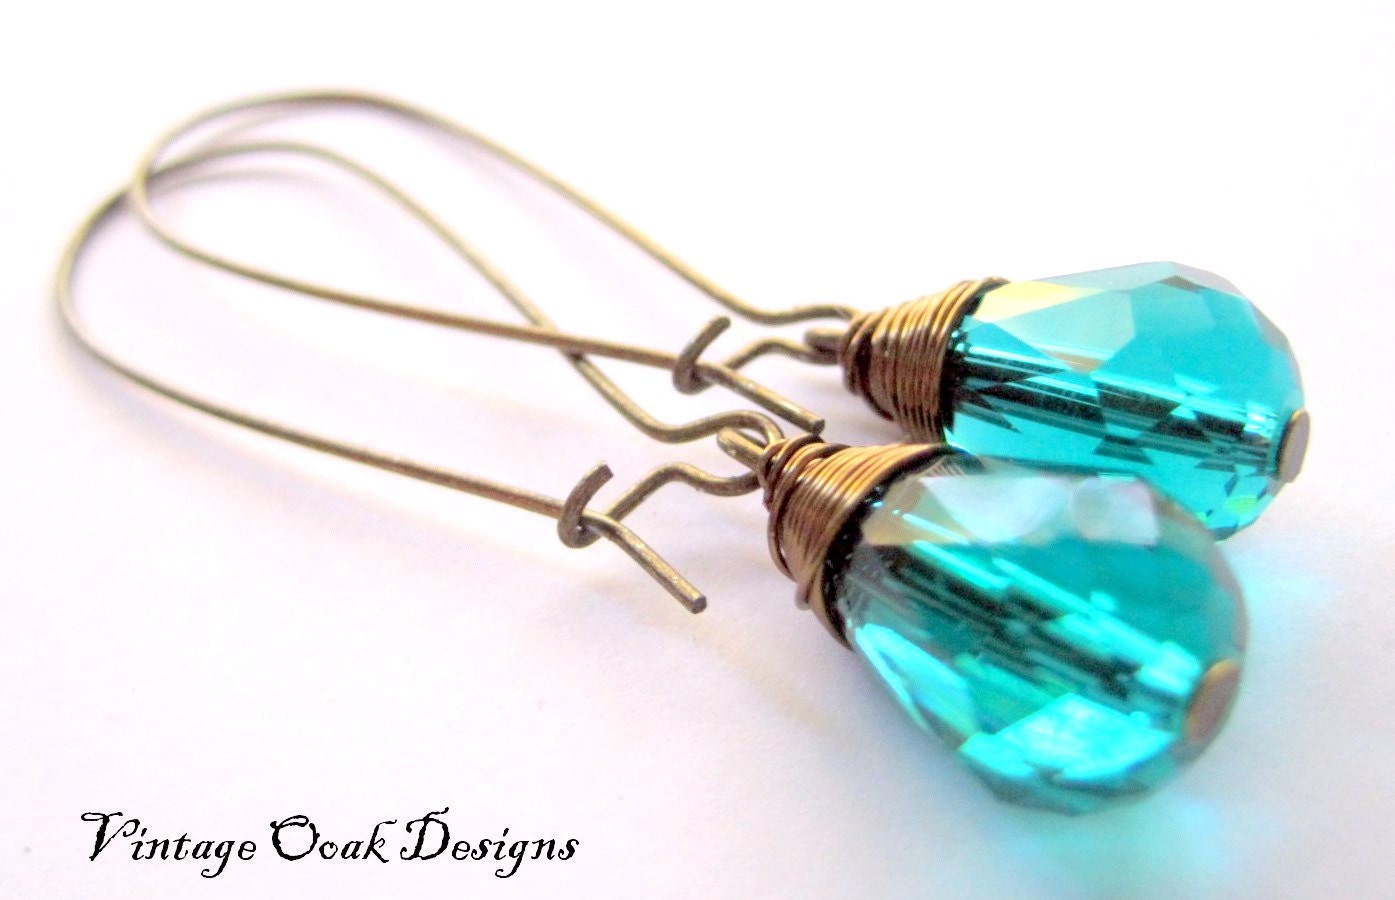 Peacock Teal Swarovski Crystal Earrings on Long Antiqued Bronze Wires -- Natural Elements Jewelry Collection - VintageOoakDesigns